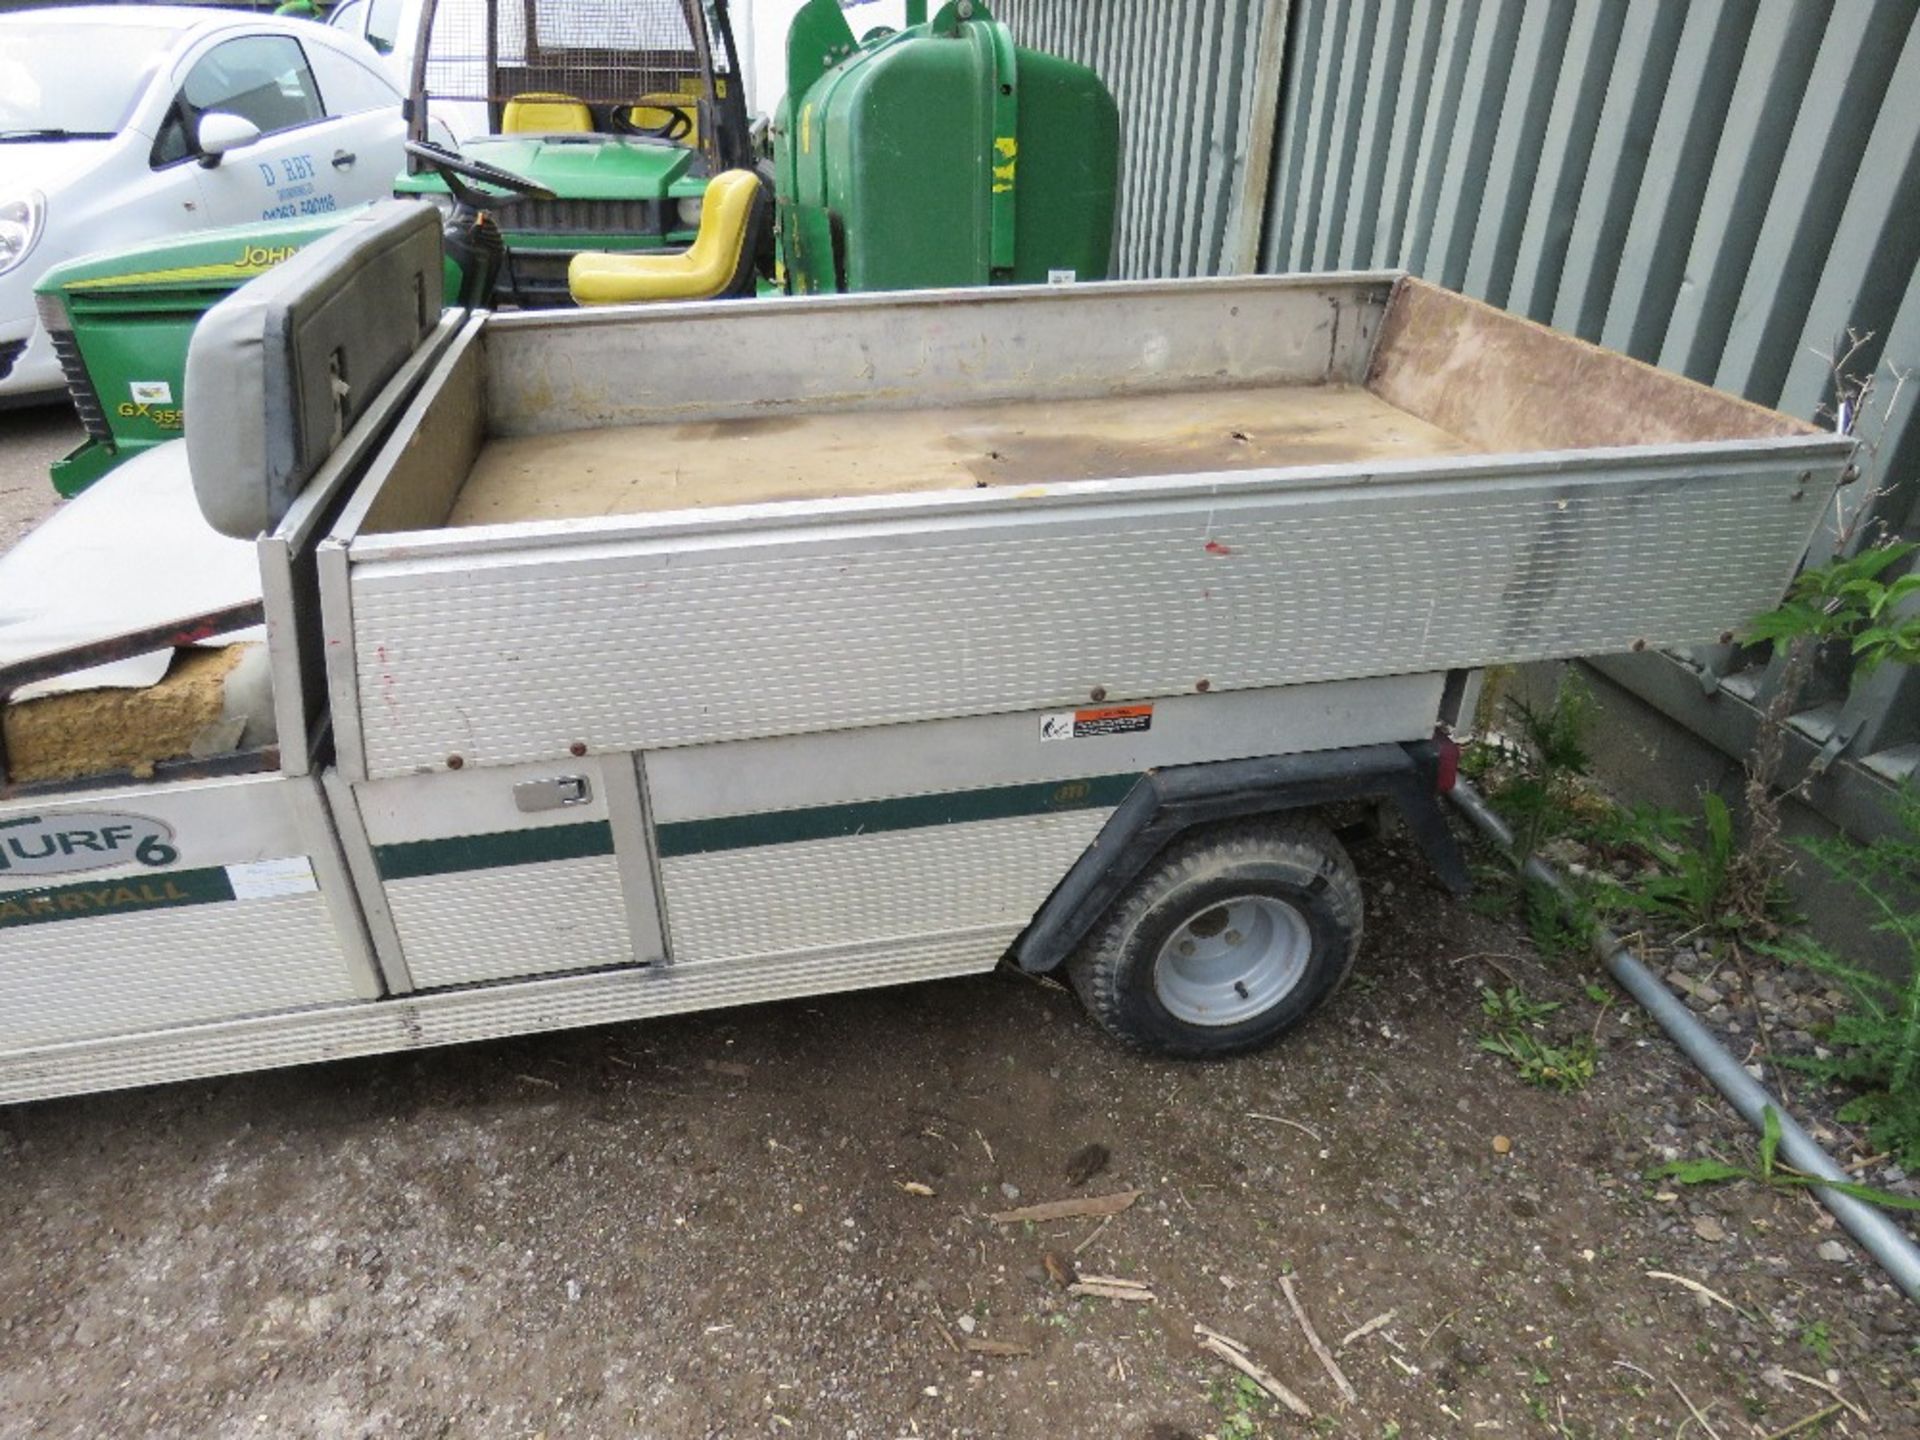 CLUBCAR CARRYALL PETROL UTILITY TRUCK. WHEN TESTED WAS SEEN TO DRIVE, STEER AND BRAKE, - Image 4 of 5